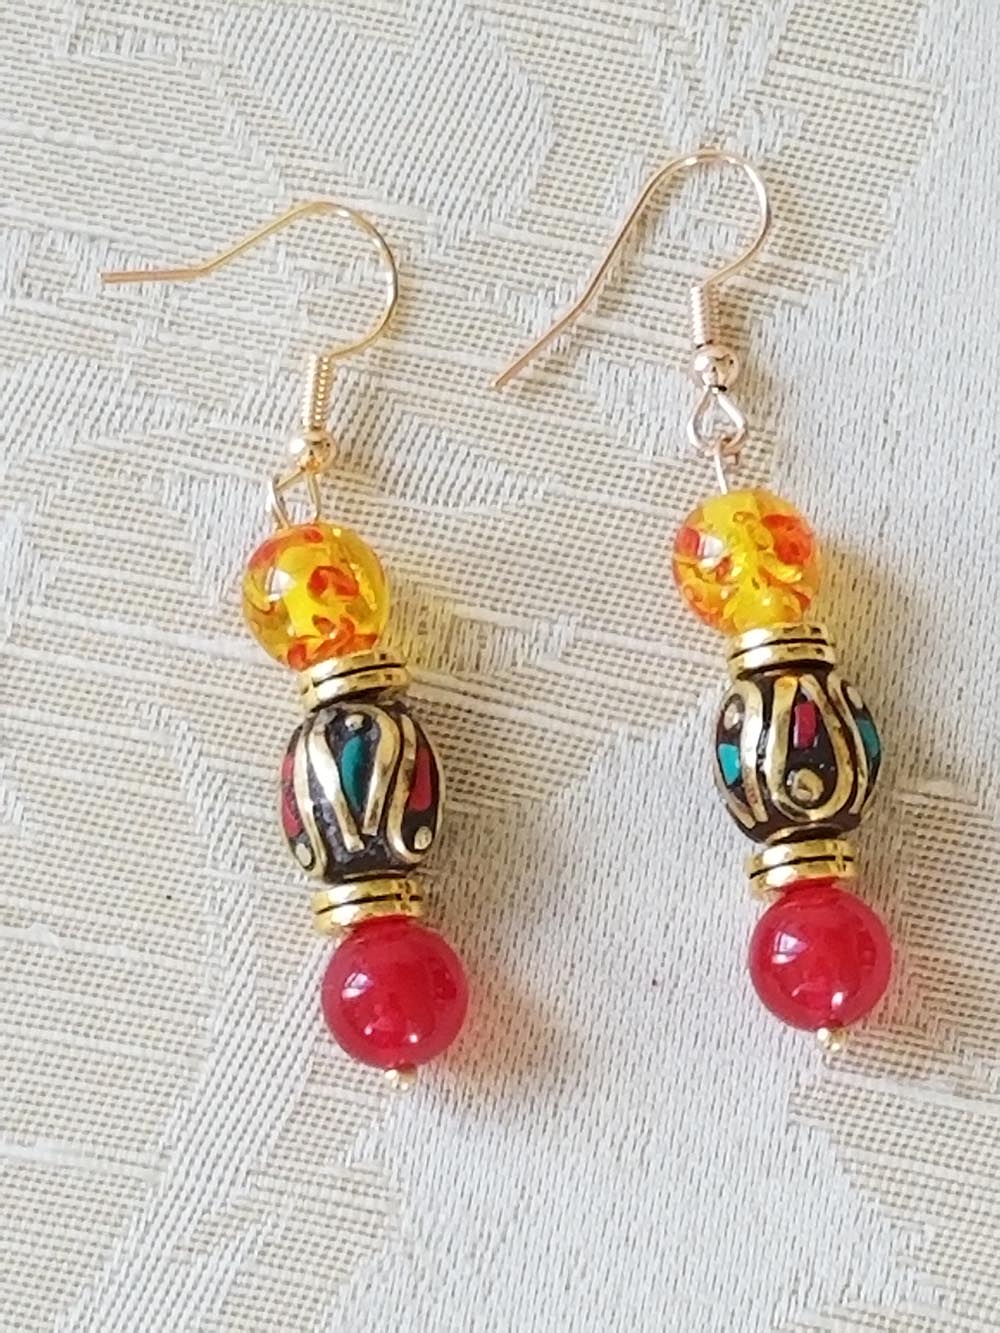 Earrings, Handcrafted in the United States